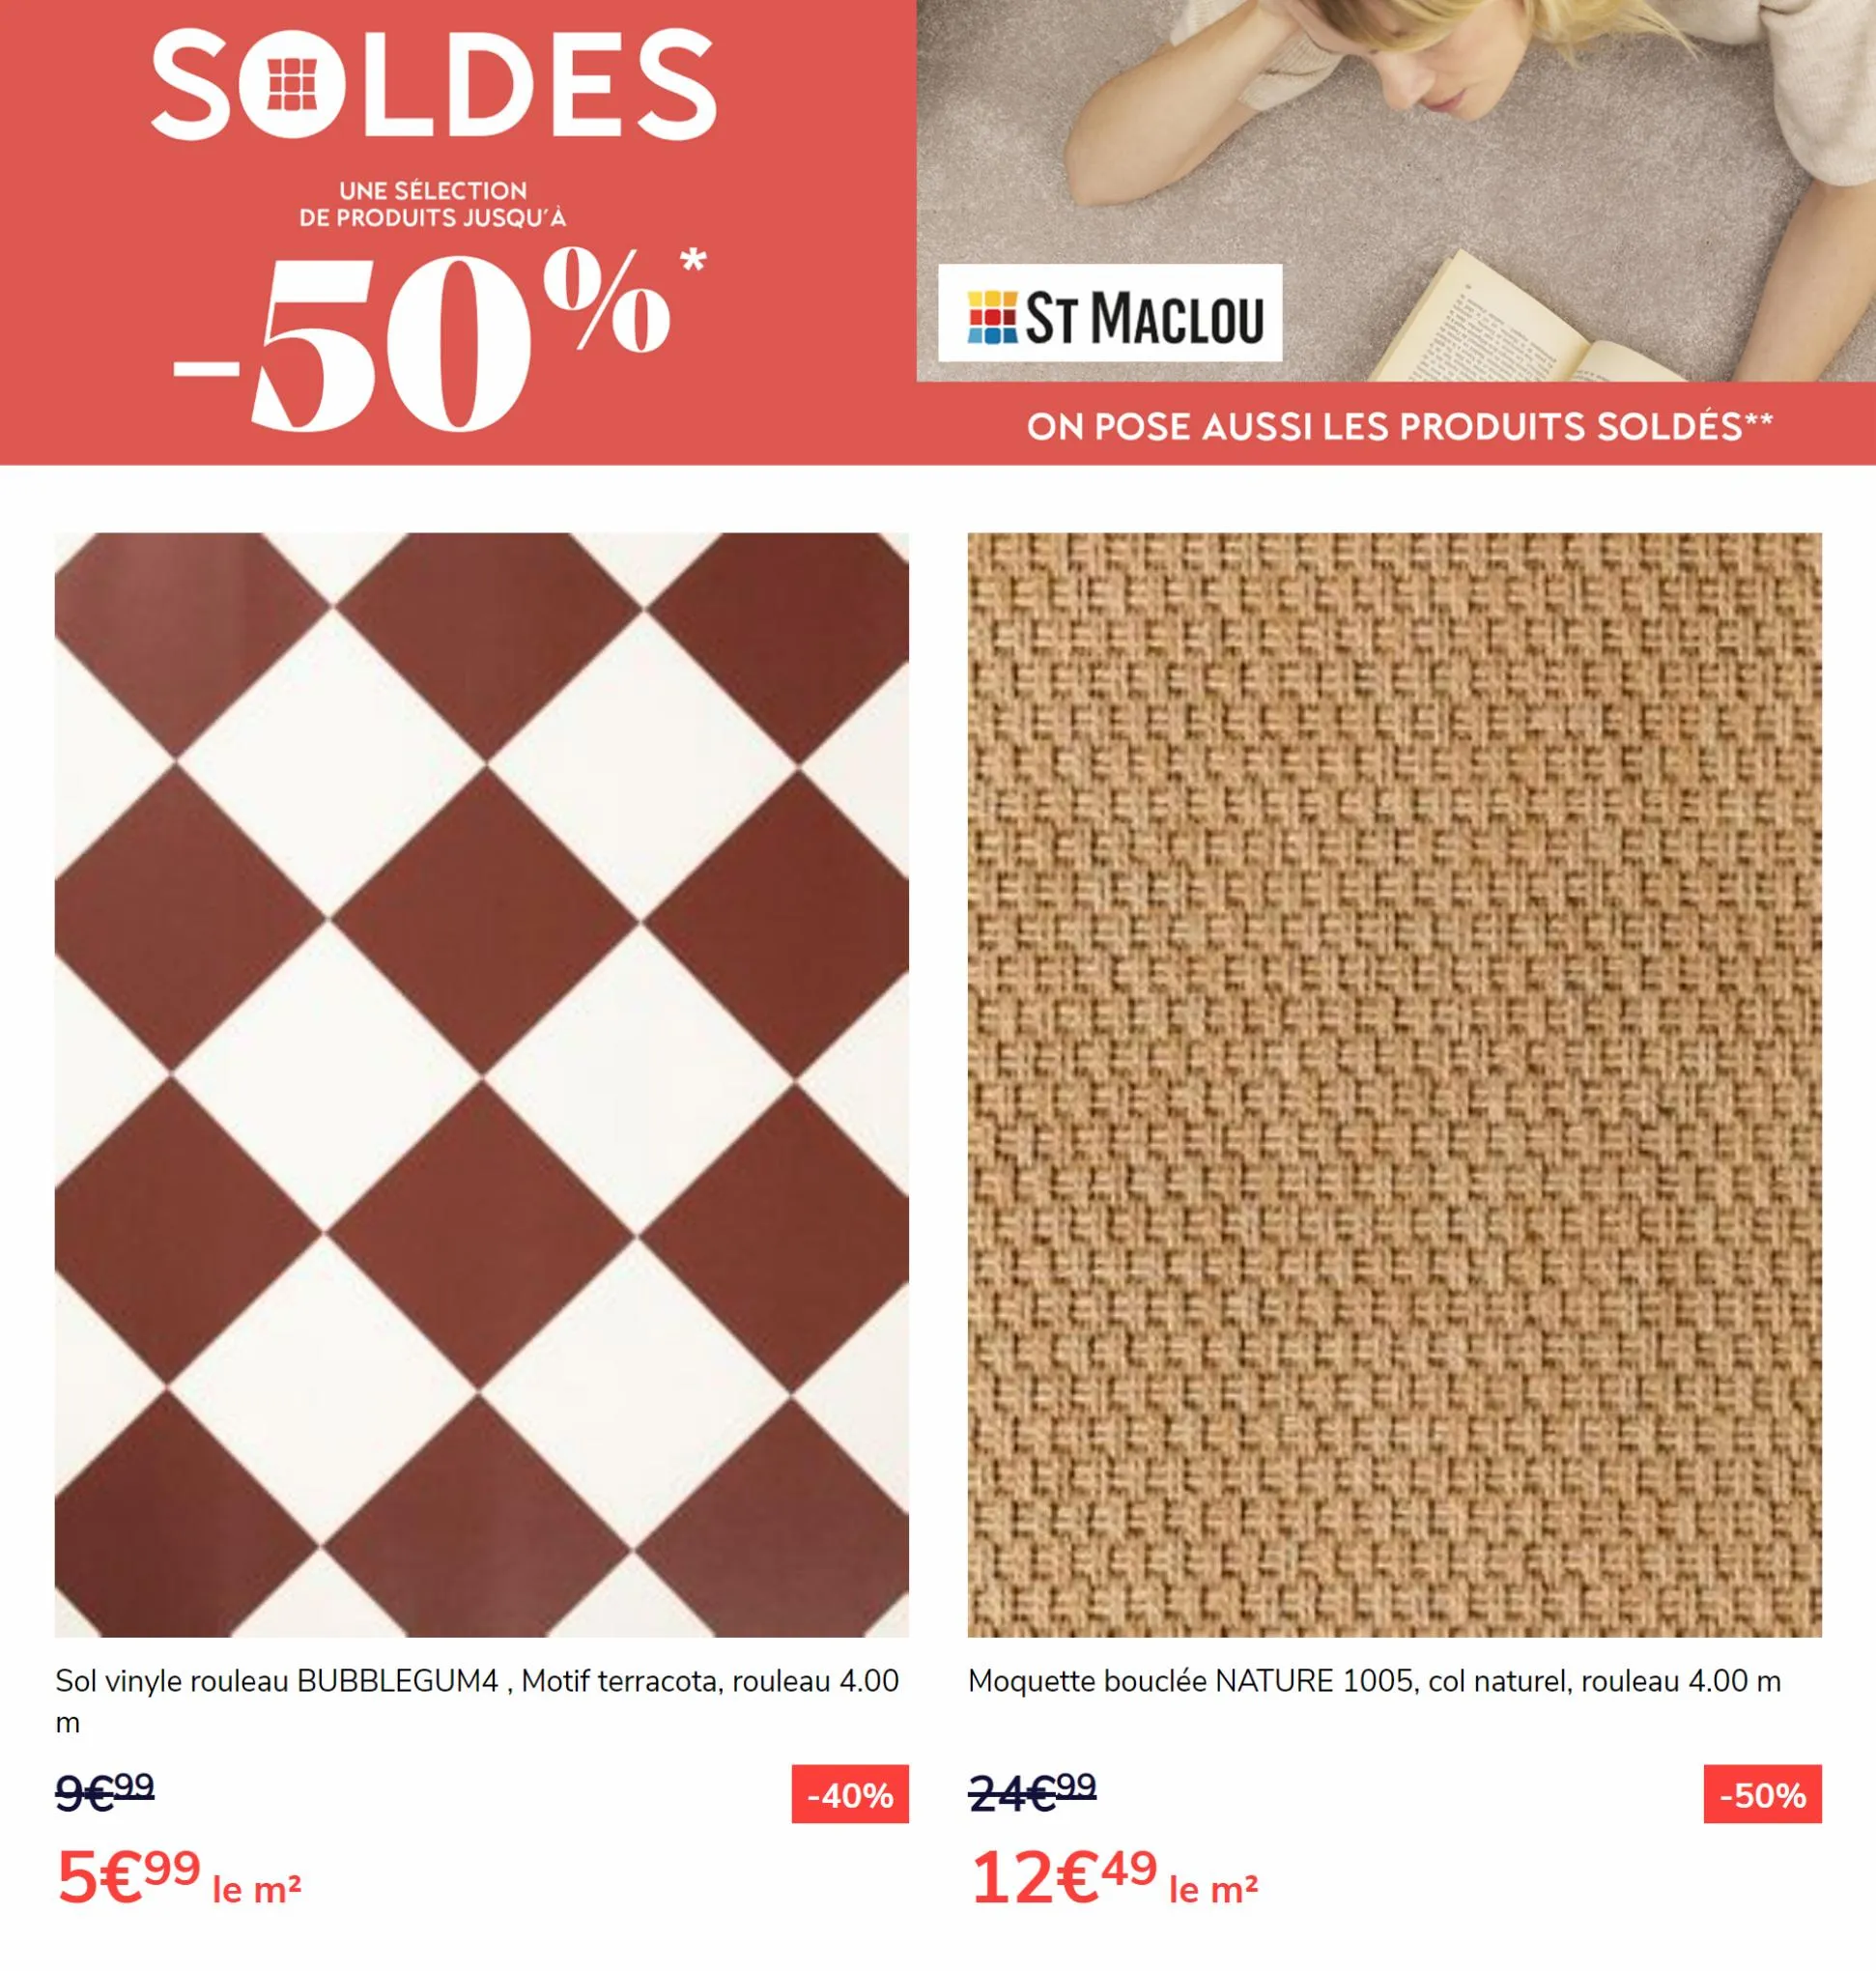 Catalogue SOLDES 50%, page 00001